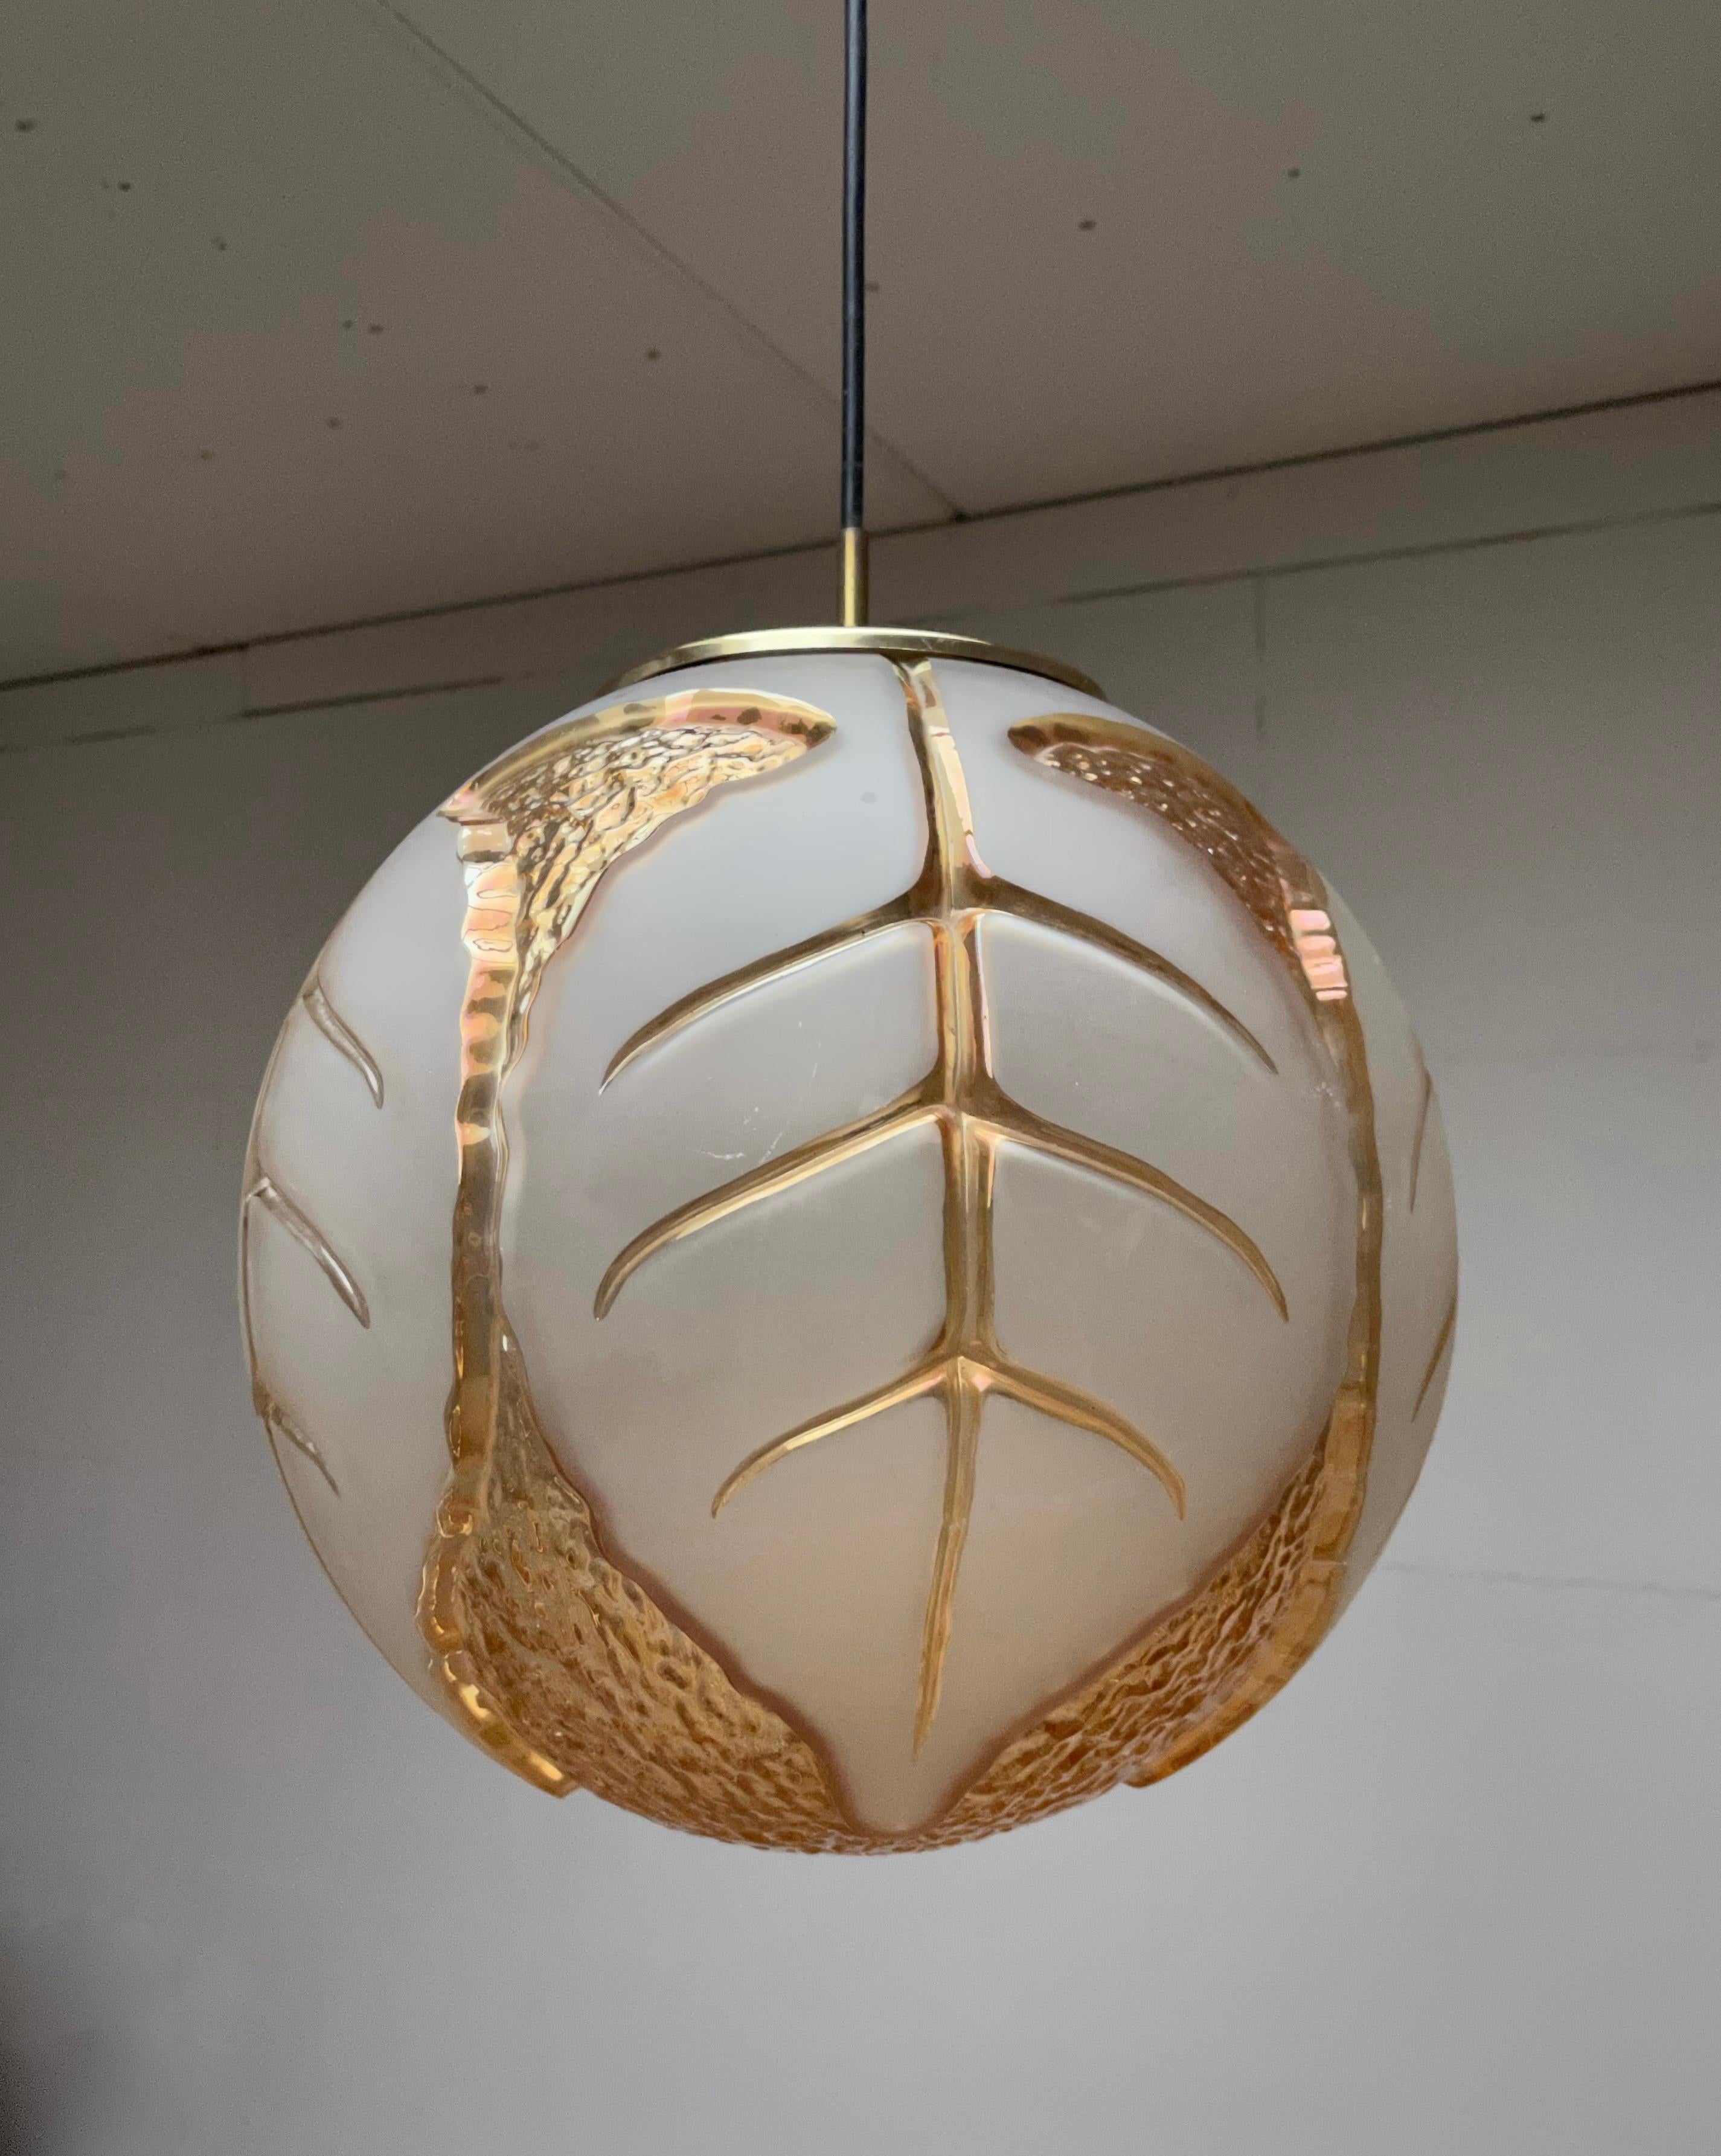 Stunning, midcentury made art glass light fixture.

If you looking for a unique art glass pendant with an organic design then this mother nature inspired pedant could be perfect for your living space. The unique manner in which the beech leafs in